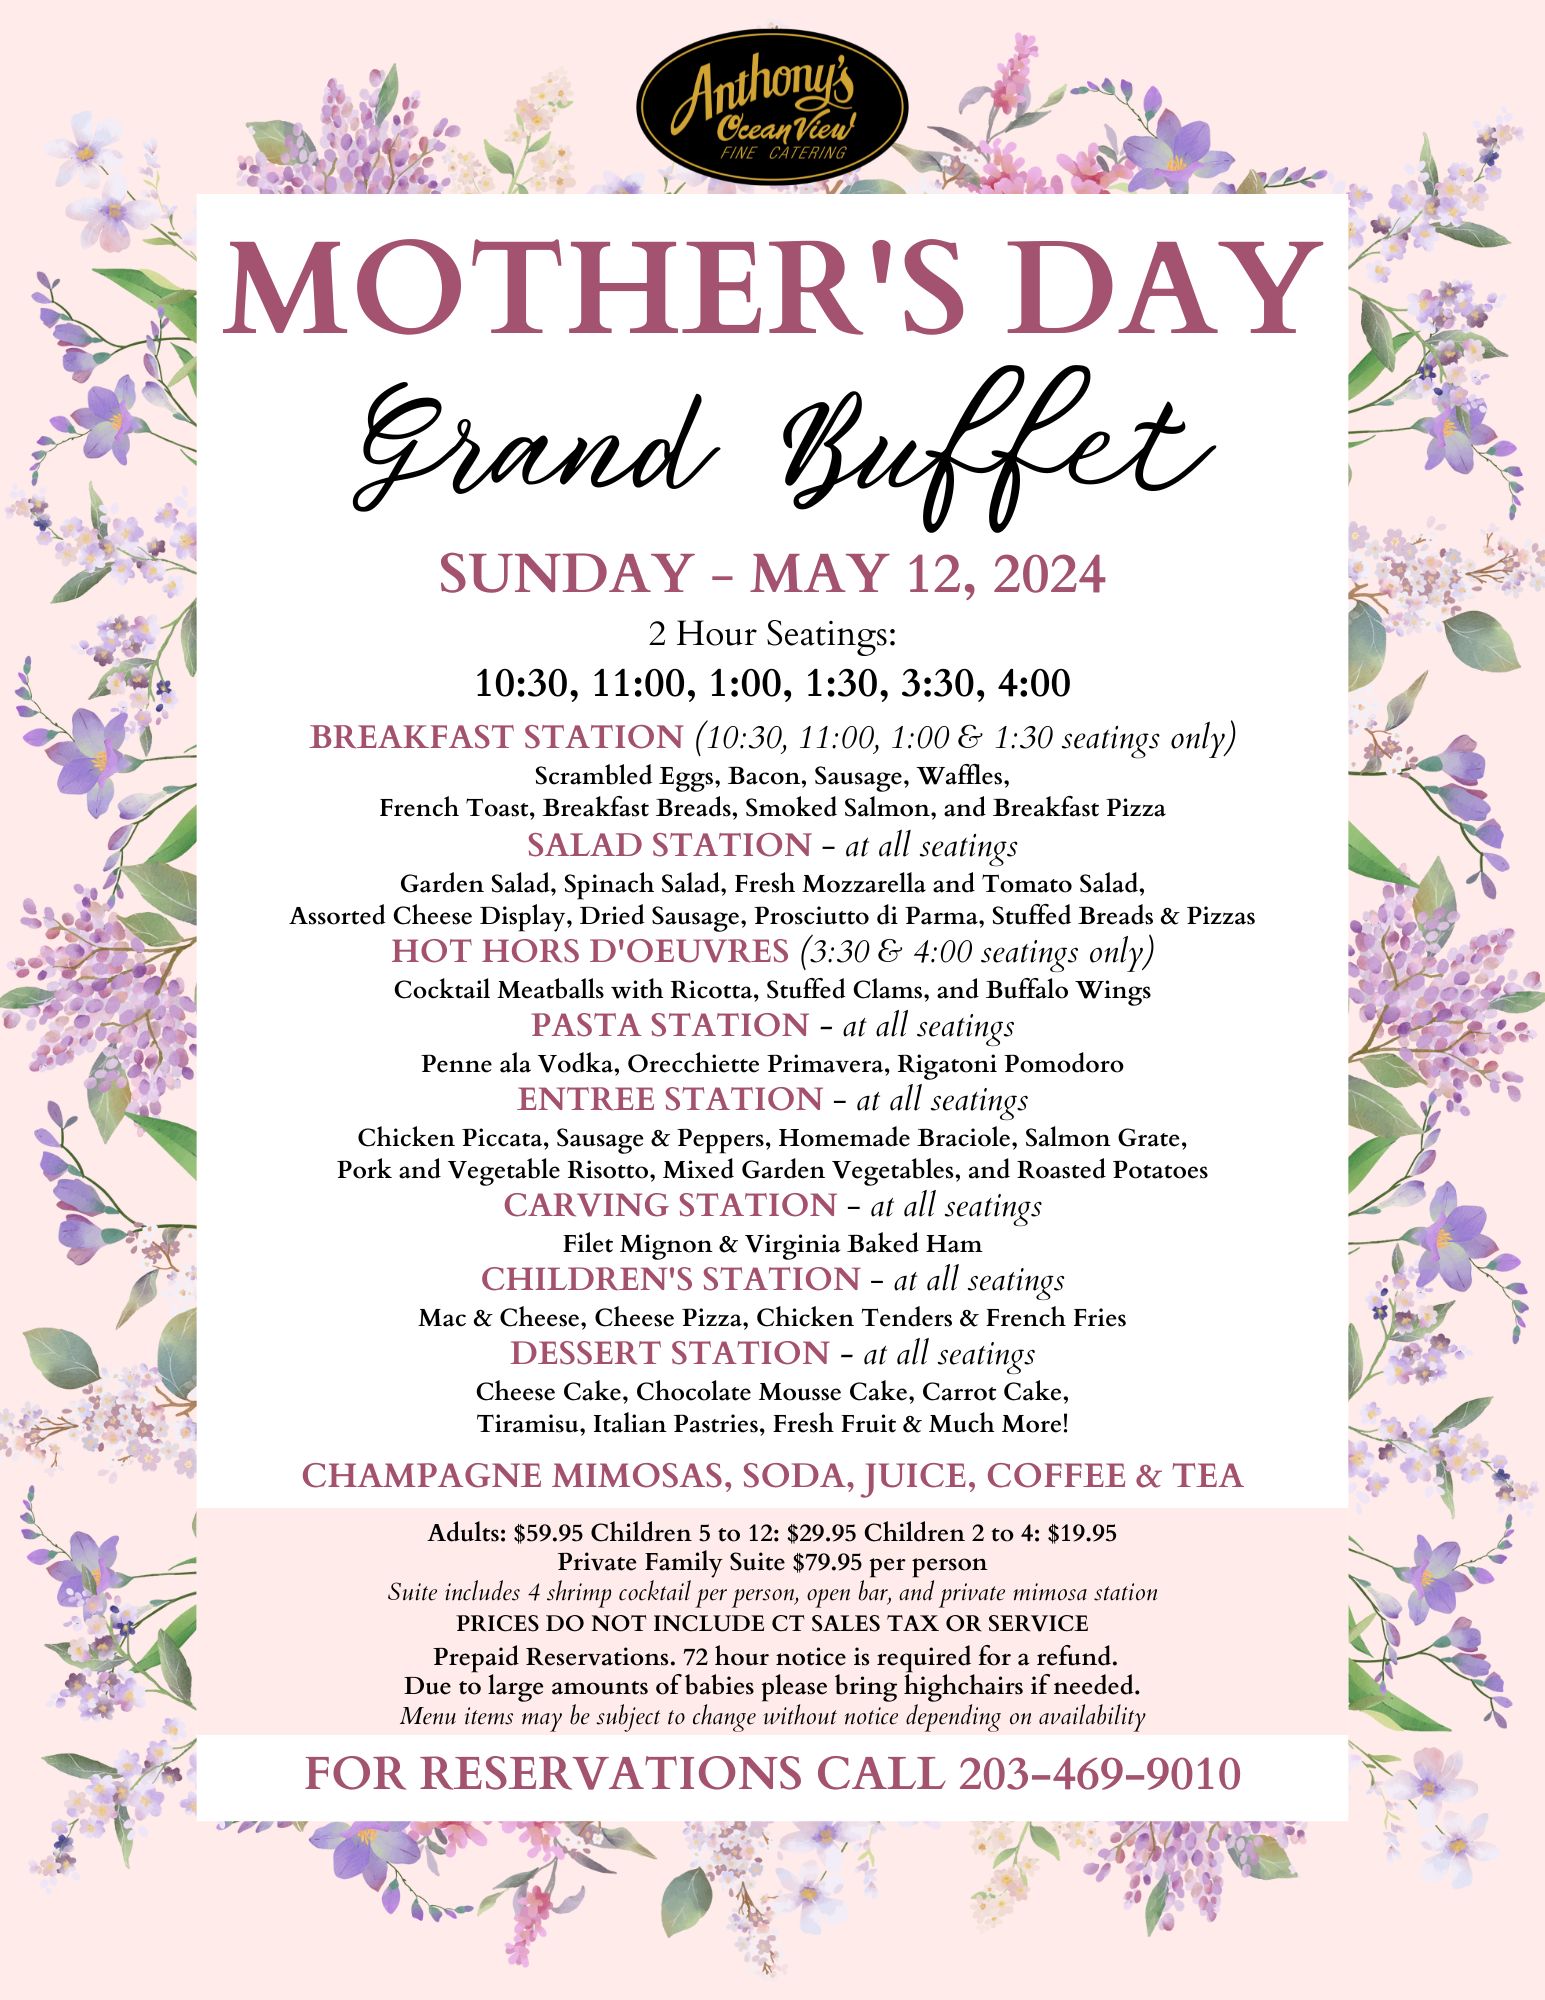 Anthonys Ocean View Mothers Day Grand Buffet Brunch